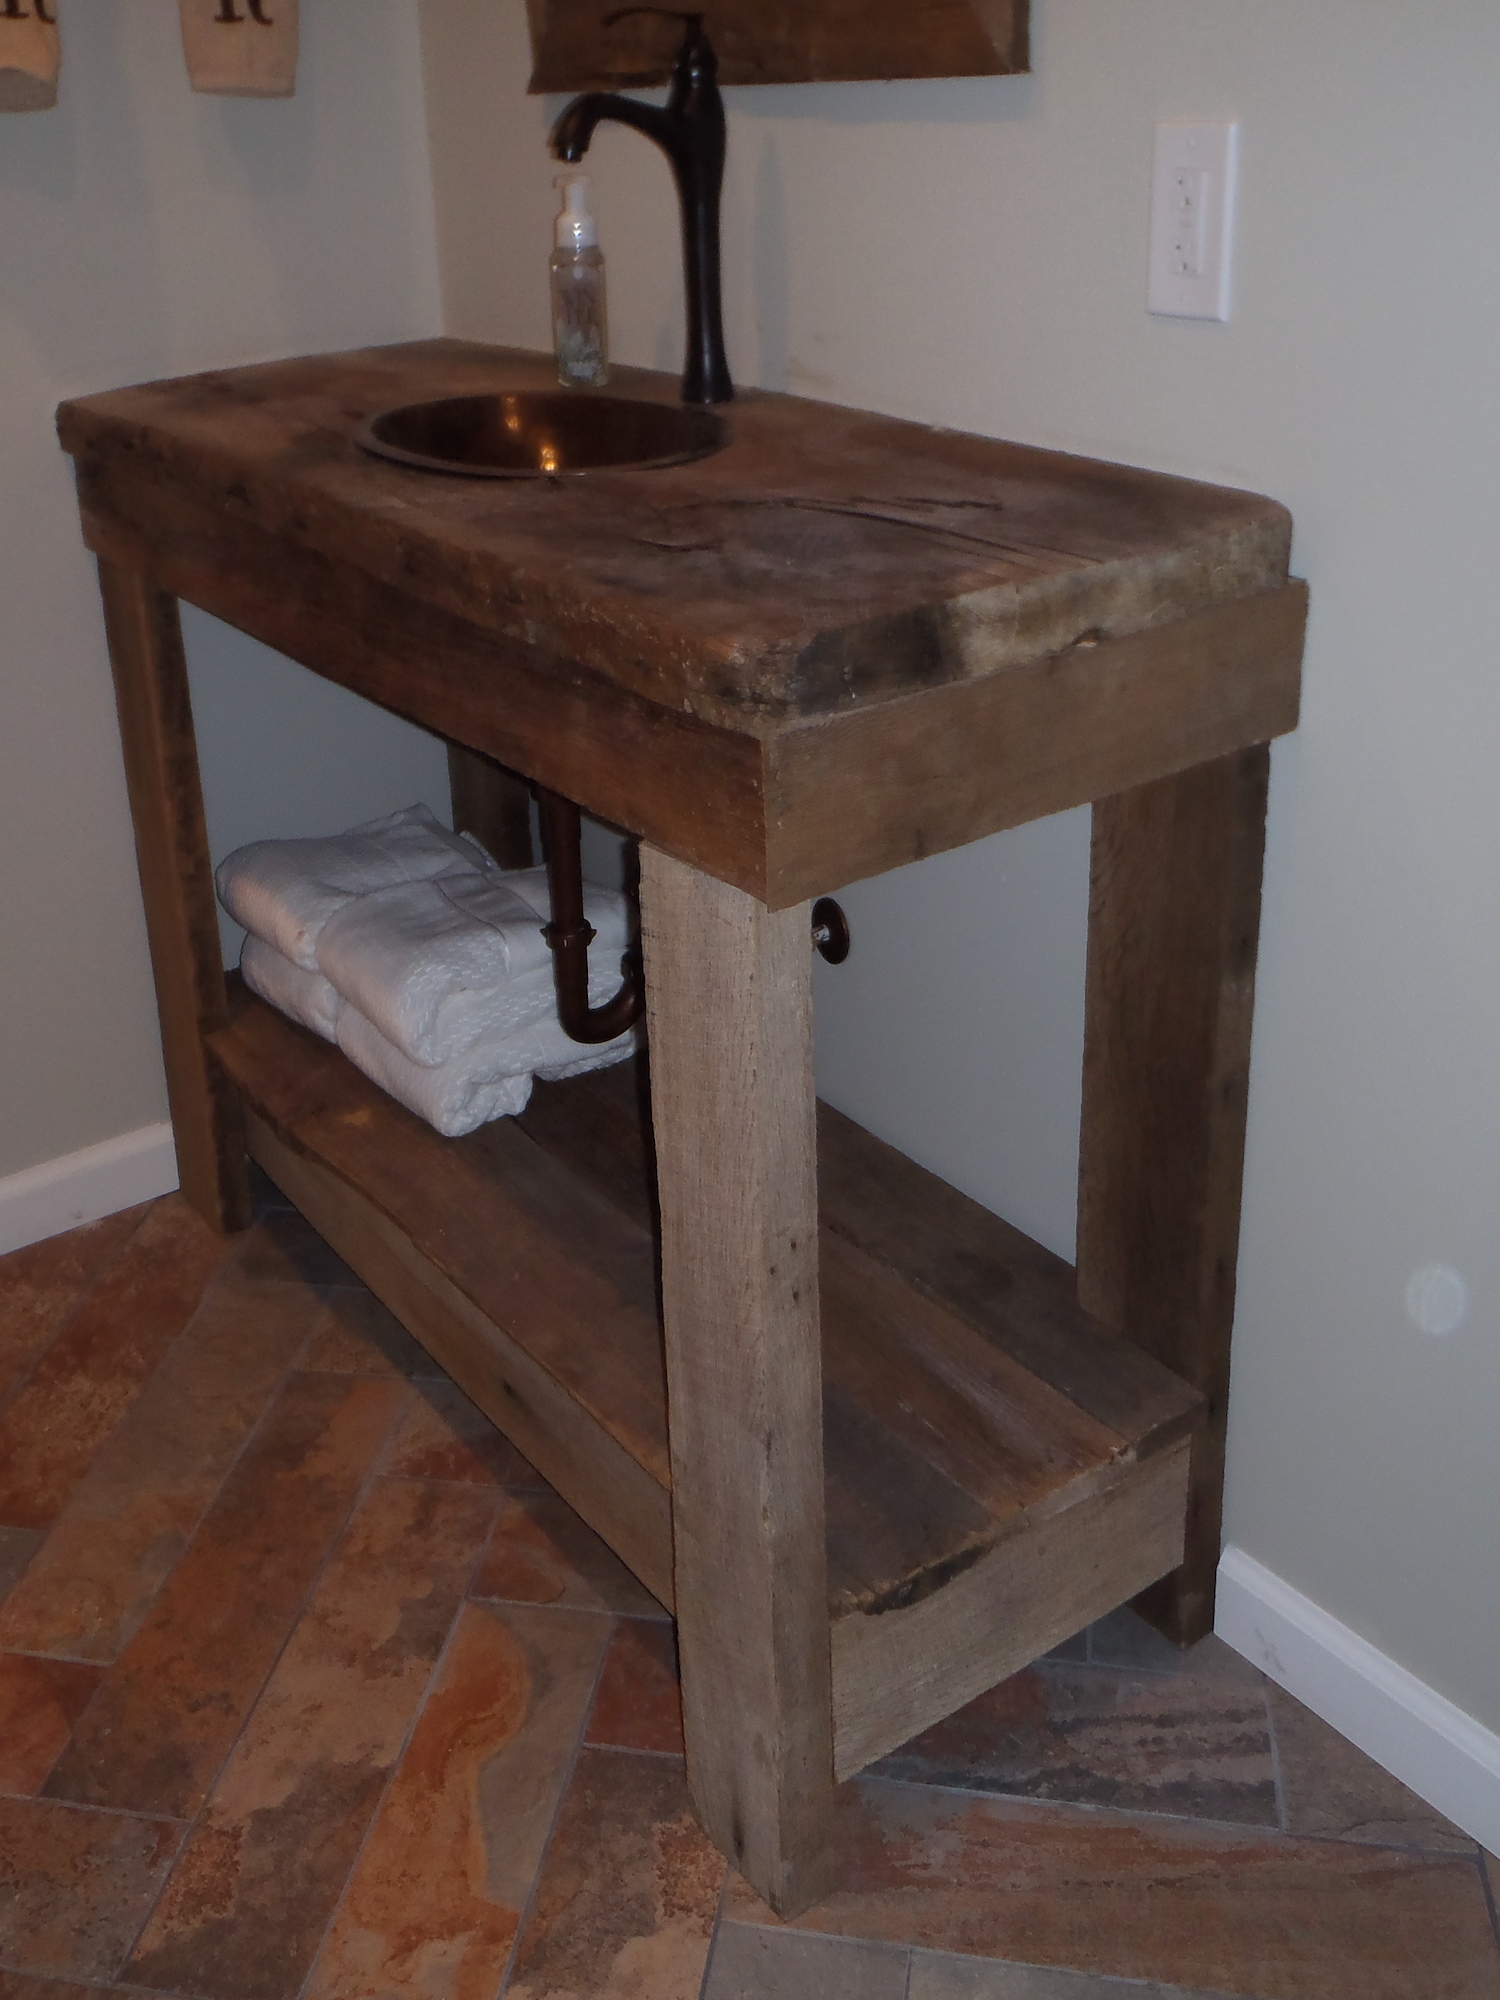 A handcrafted washbin designed and created by a customer